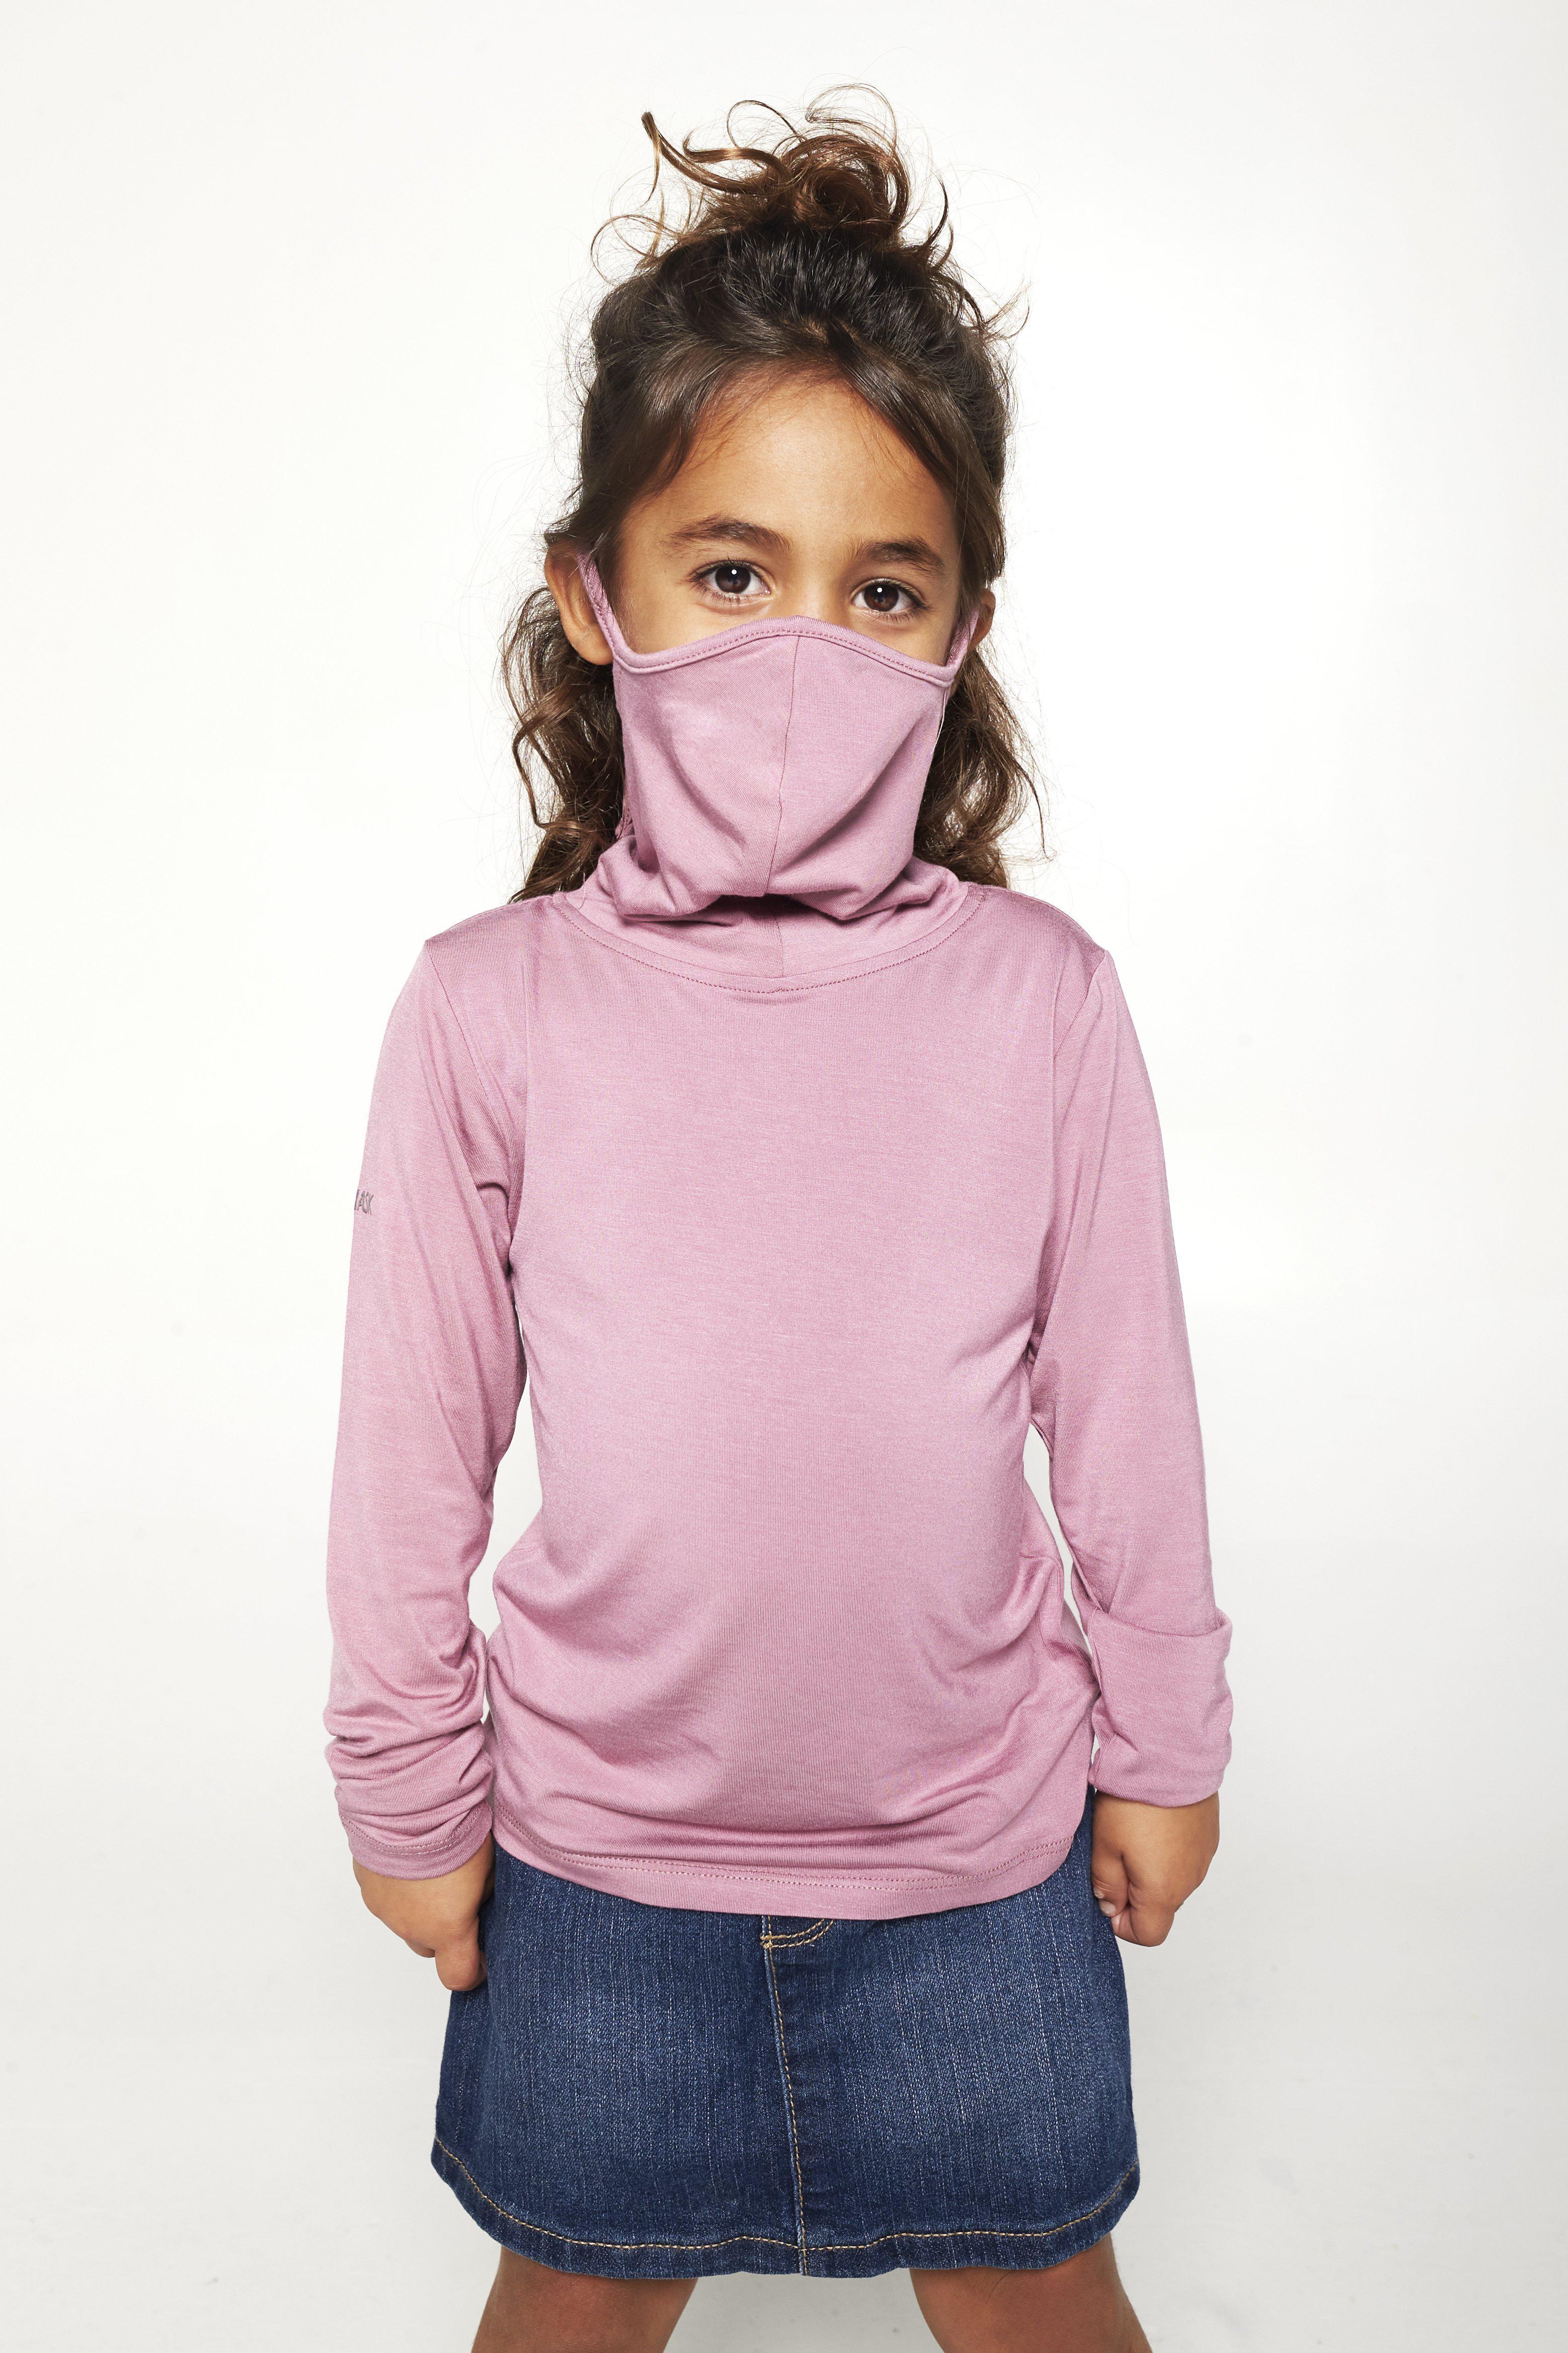 Kids Long Sleeve Lavender Shmask™ Earloop Face Mask for Kids and Adults